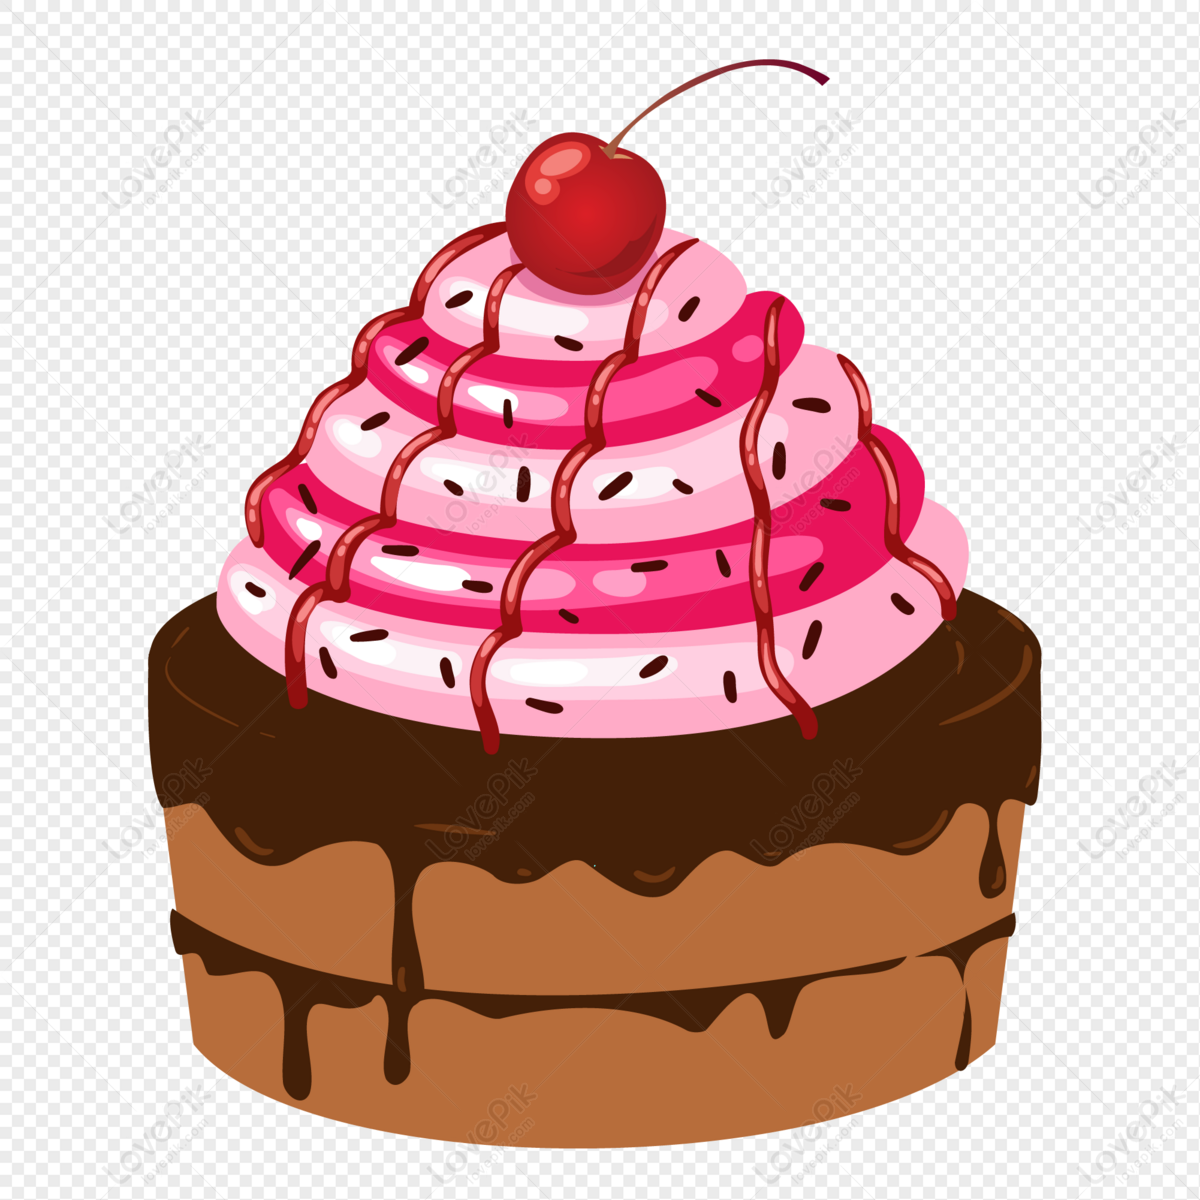 Flat Cake Decoration Material, Cake, Fruit, Strawberry PNG Hd Transparent  Image And Clipart Image For Free Download - Lovepik | 649961614